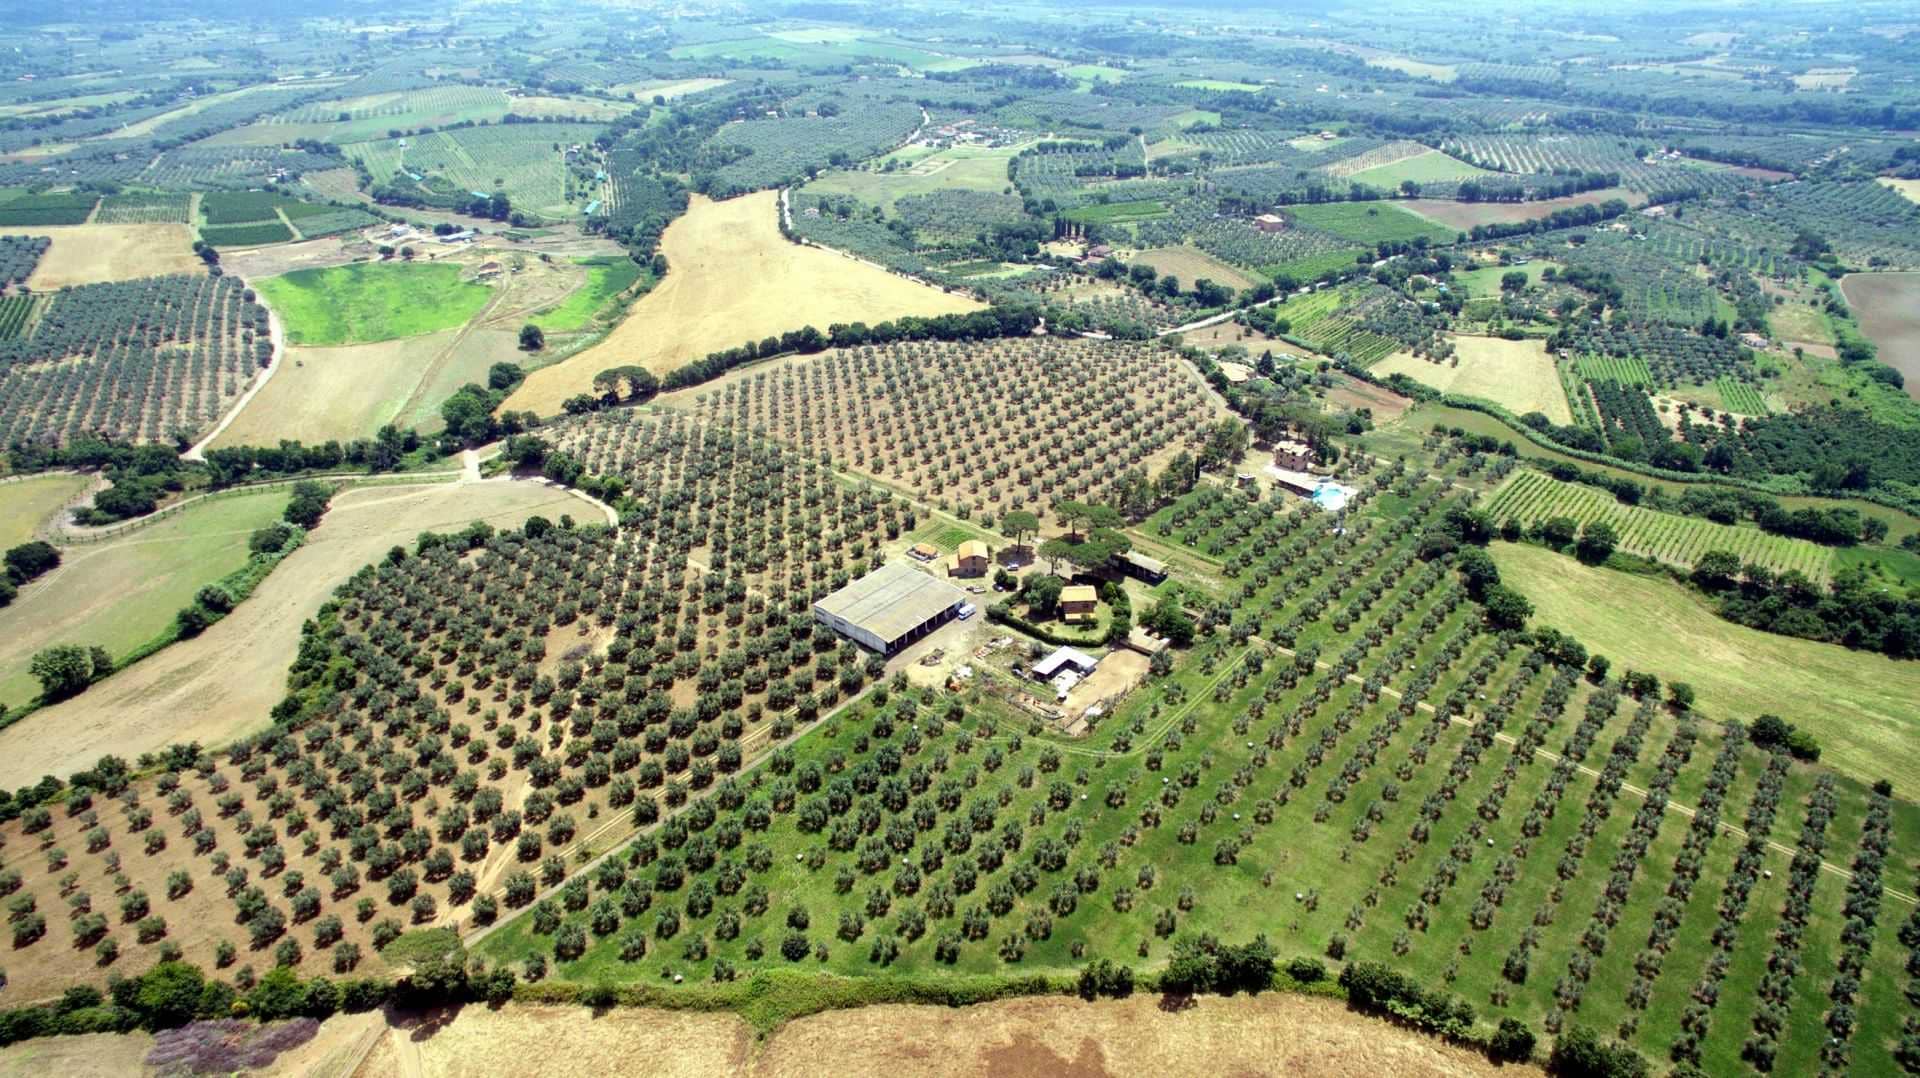 profiles-production-the-best-olive-oils-sustainable-tourism-and-highquality-production-at-traldi-farm-olive-oil-times